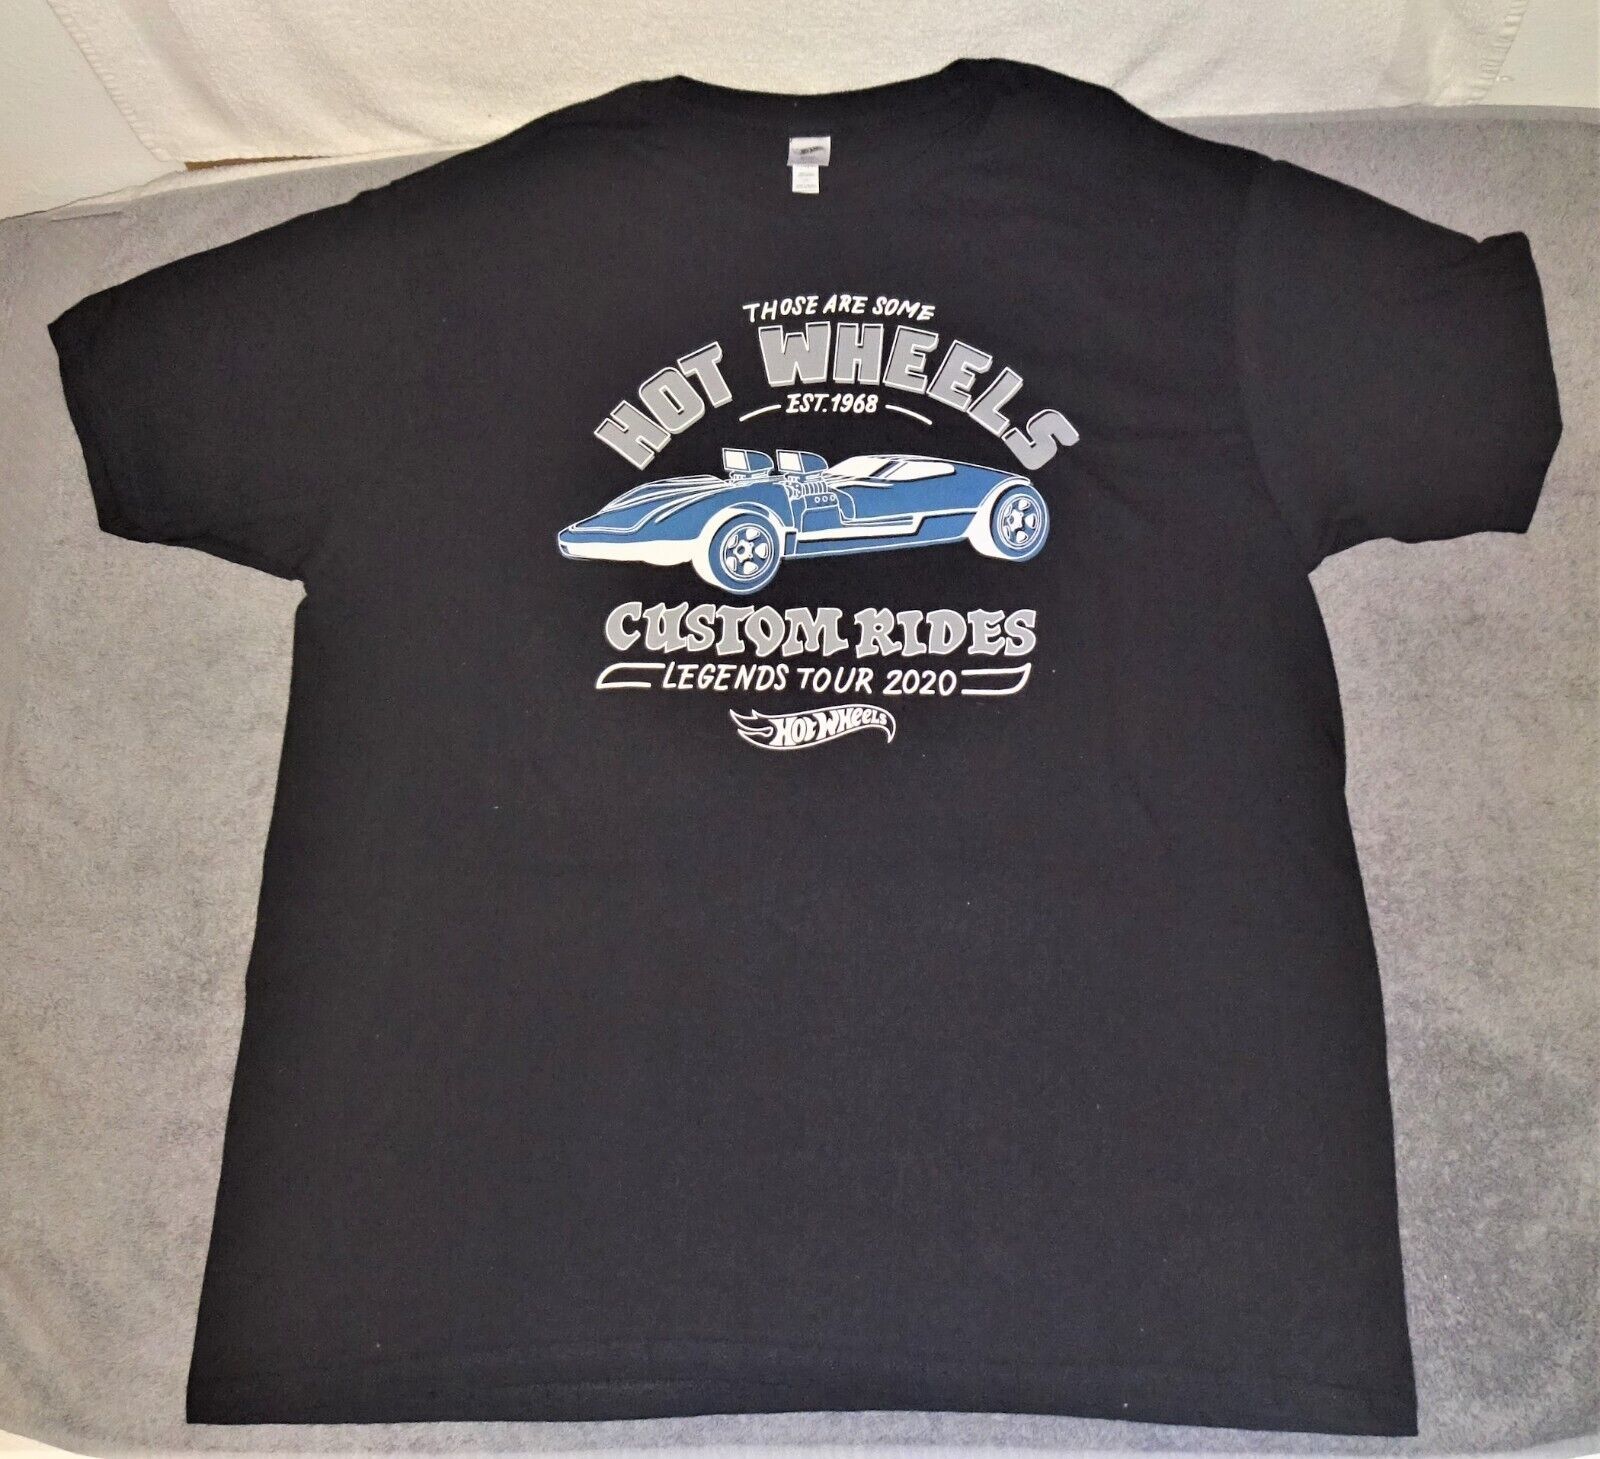 Primary image for Hot Wheels Custom Rides Legends Tour 2020 Twin Mill Men's X Large T-Shirt Black